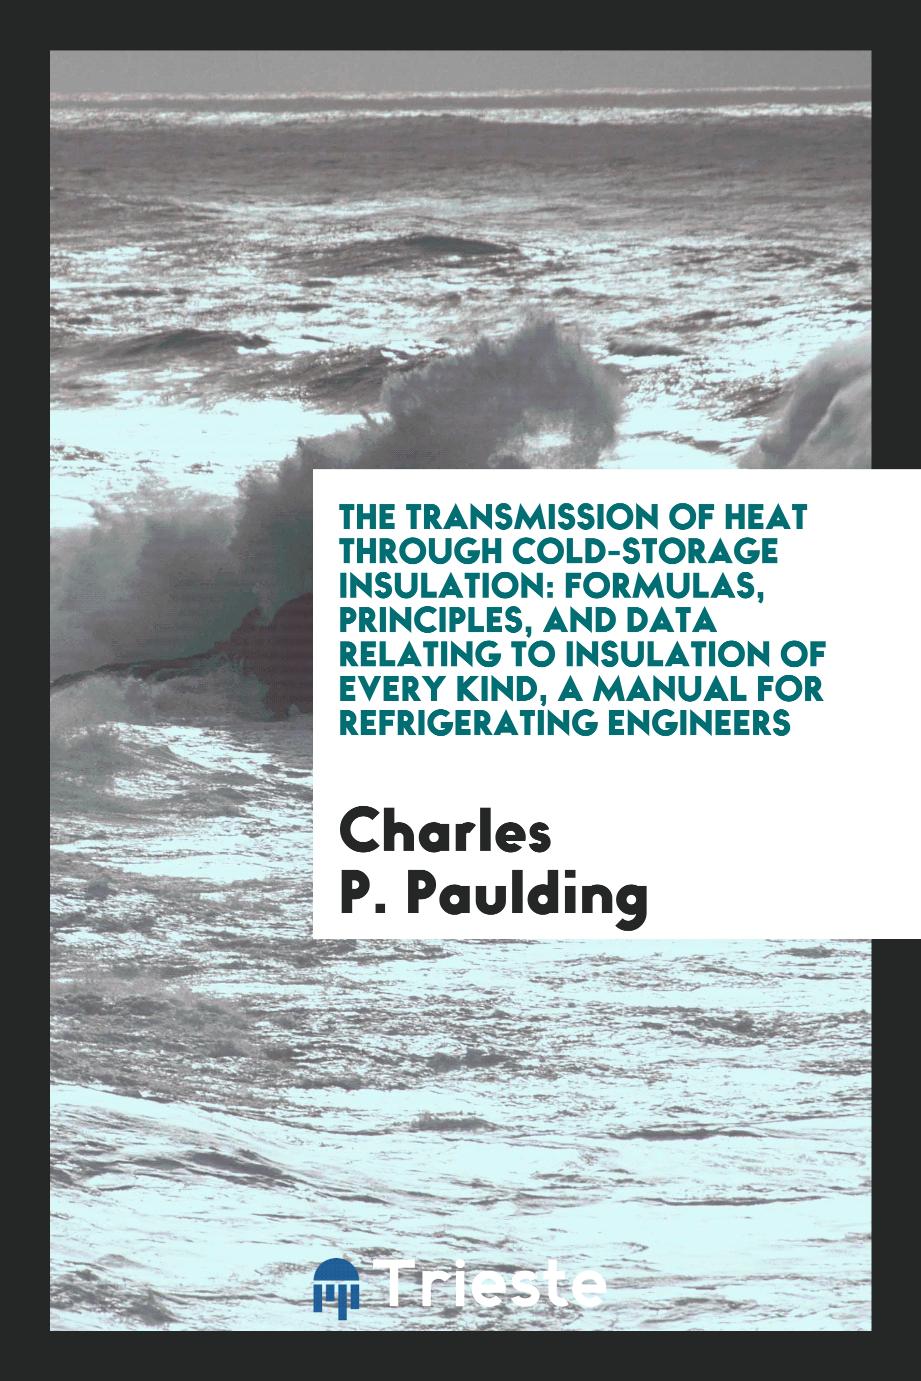 The Transmission of Heat Through Cold-storage Insulation: Formulas, Principles, and Data Relating to Insulation of Every Kind, a Manual for Refrigerating Engineers